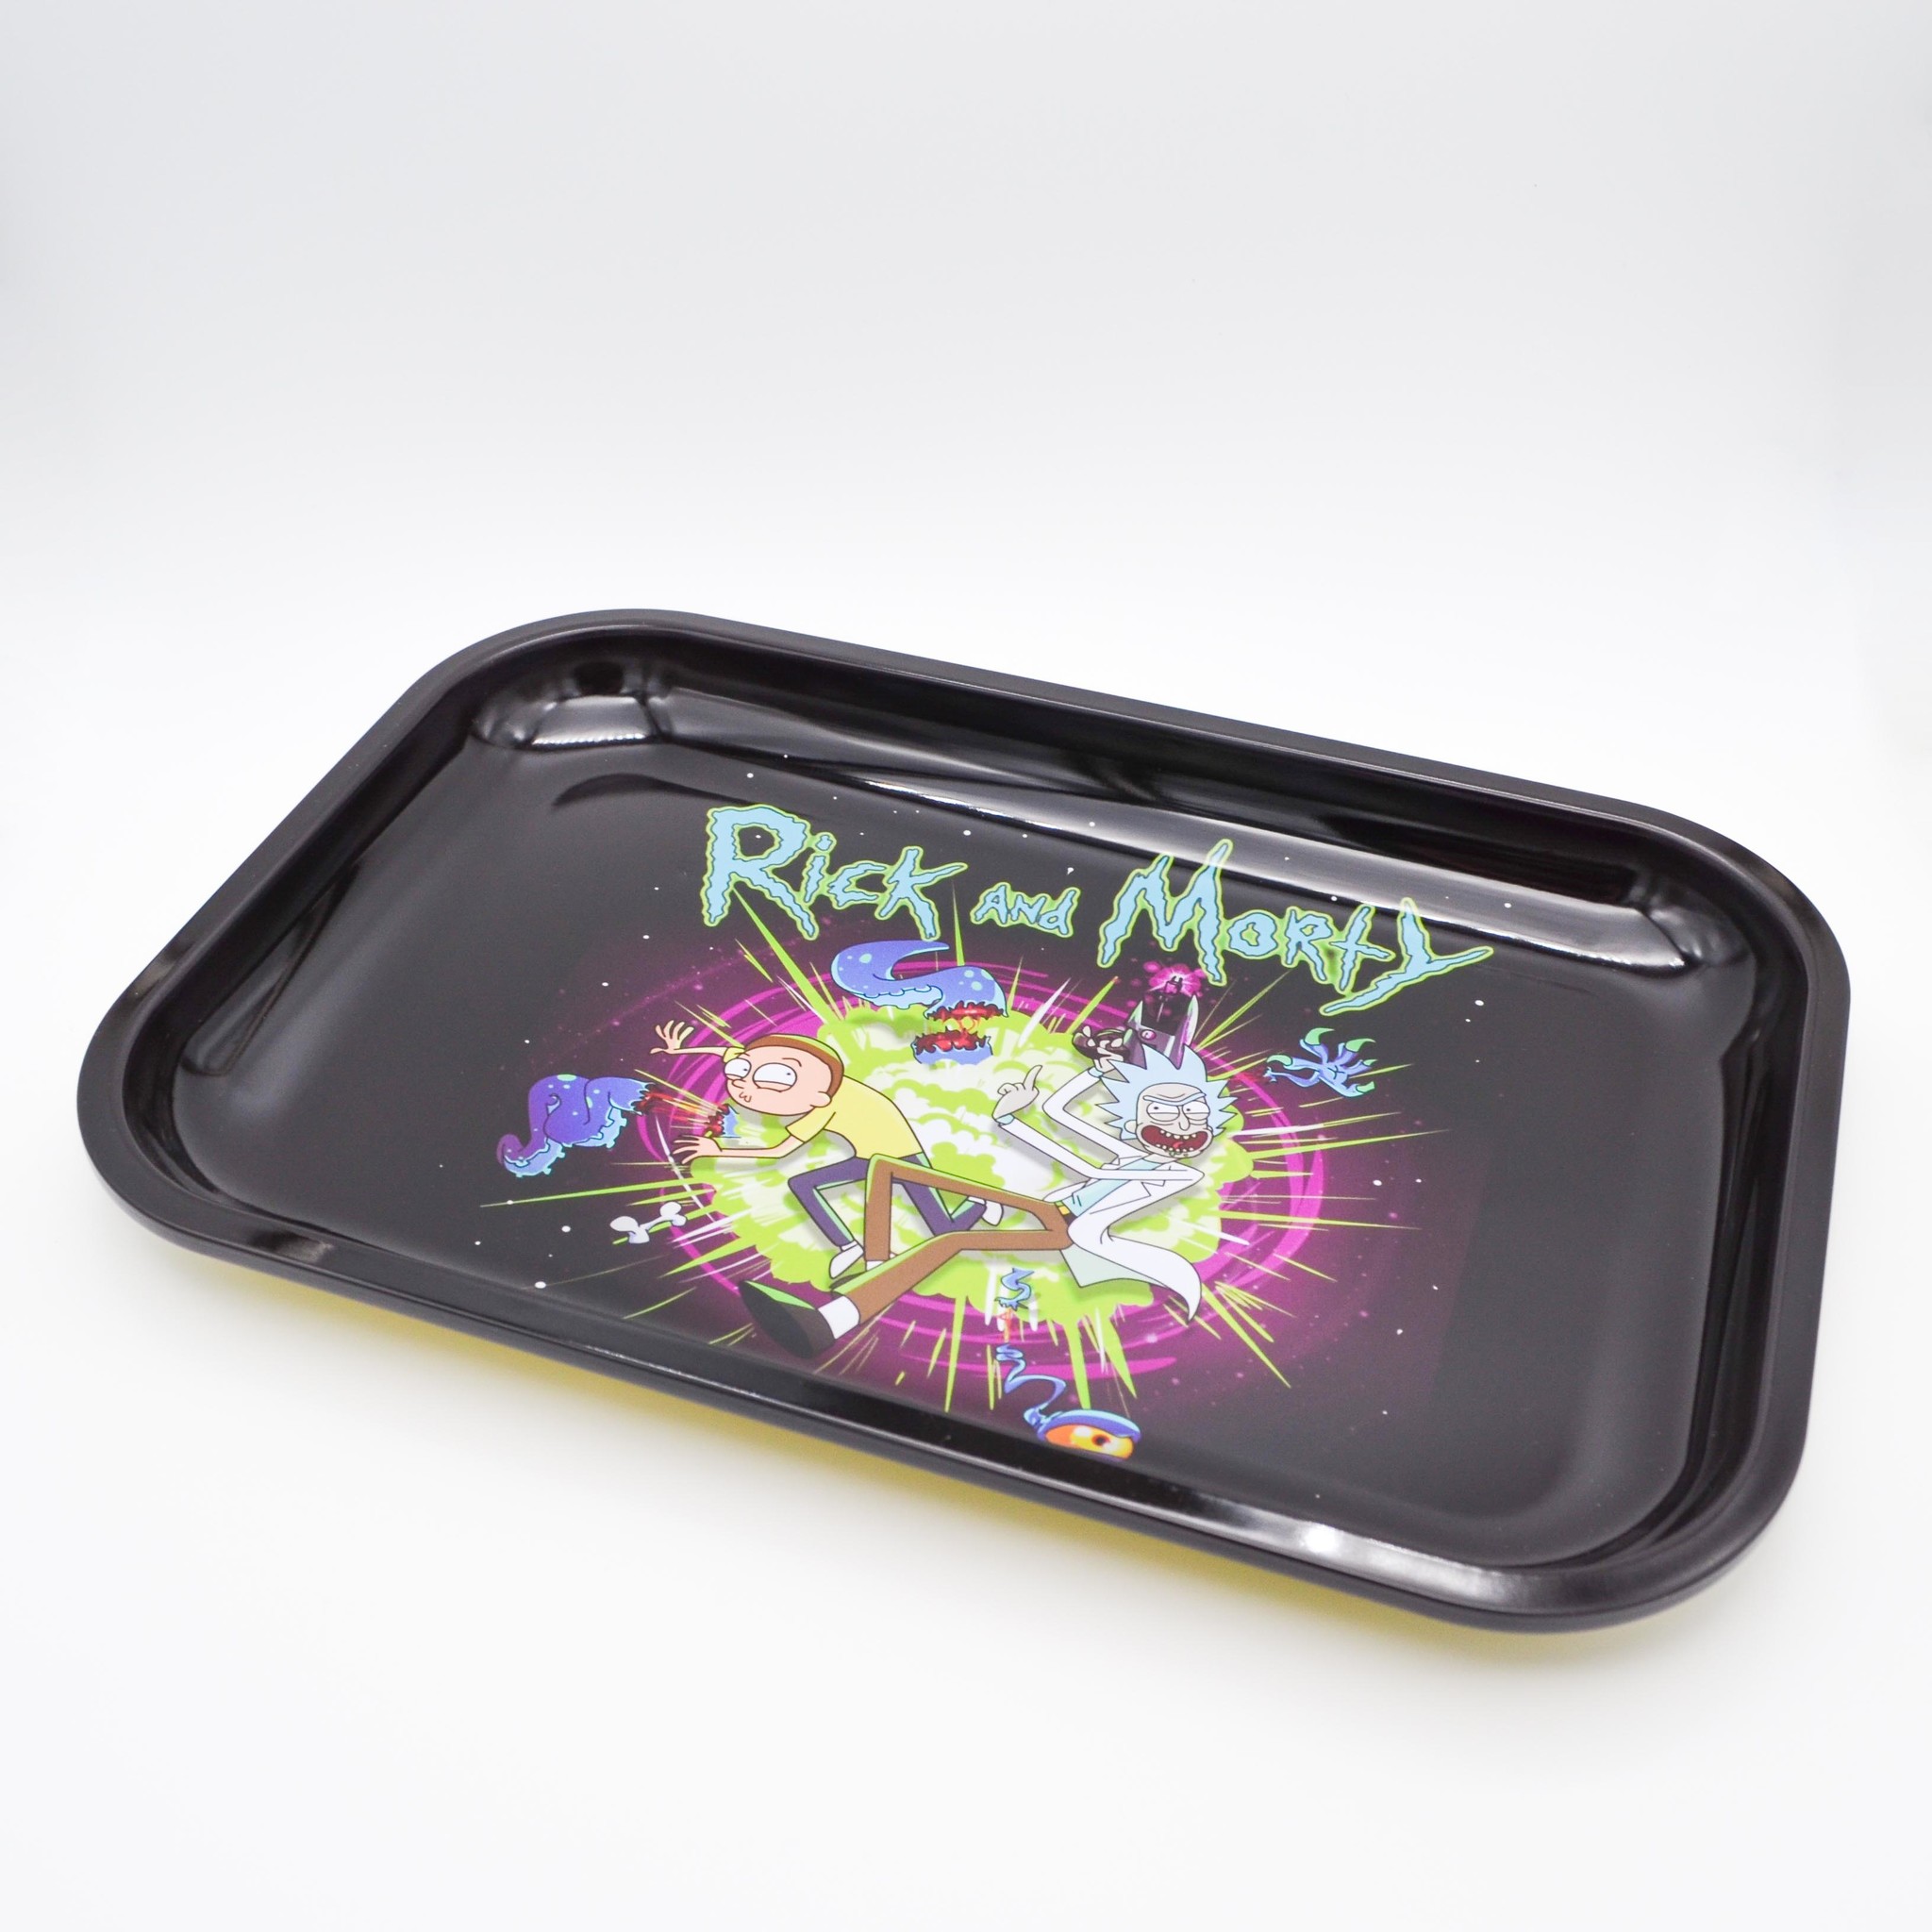 Rick And morty Rolling Tray Large for Sale in San Antonio, TX - OfferUp